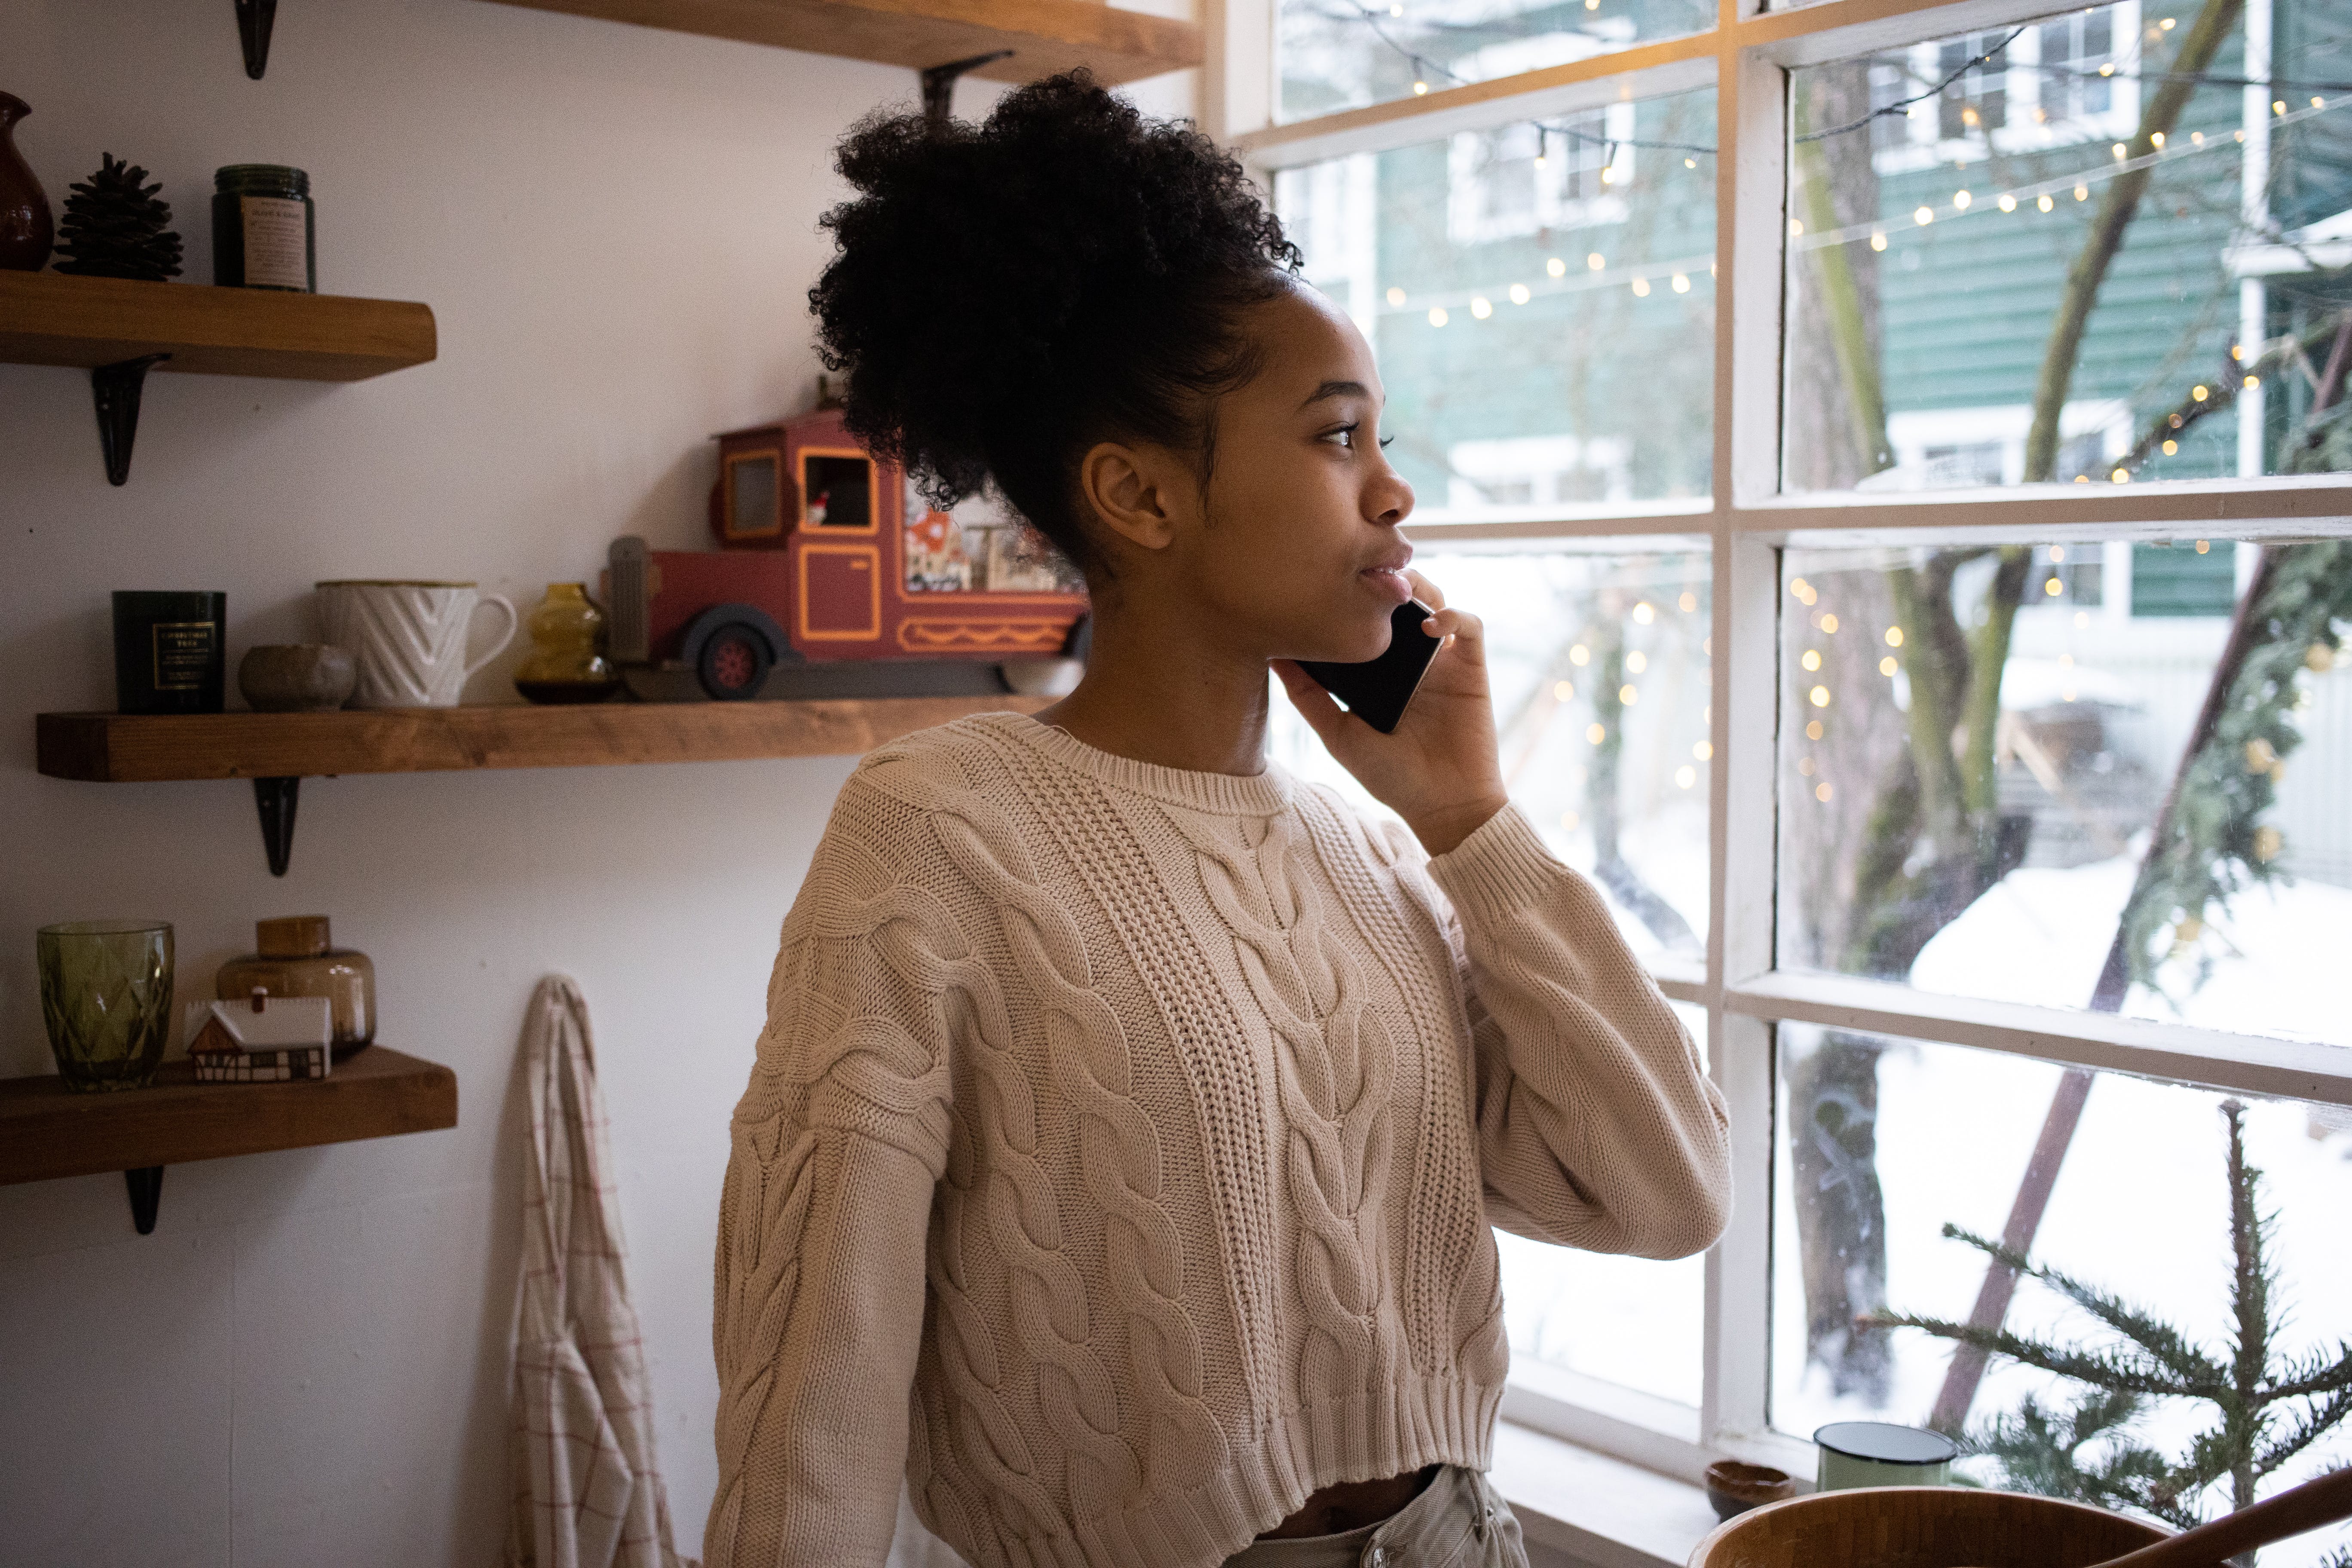 A woman stands in front of a window while talking on the phone.